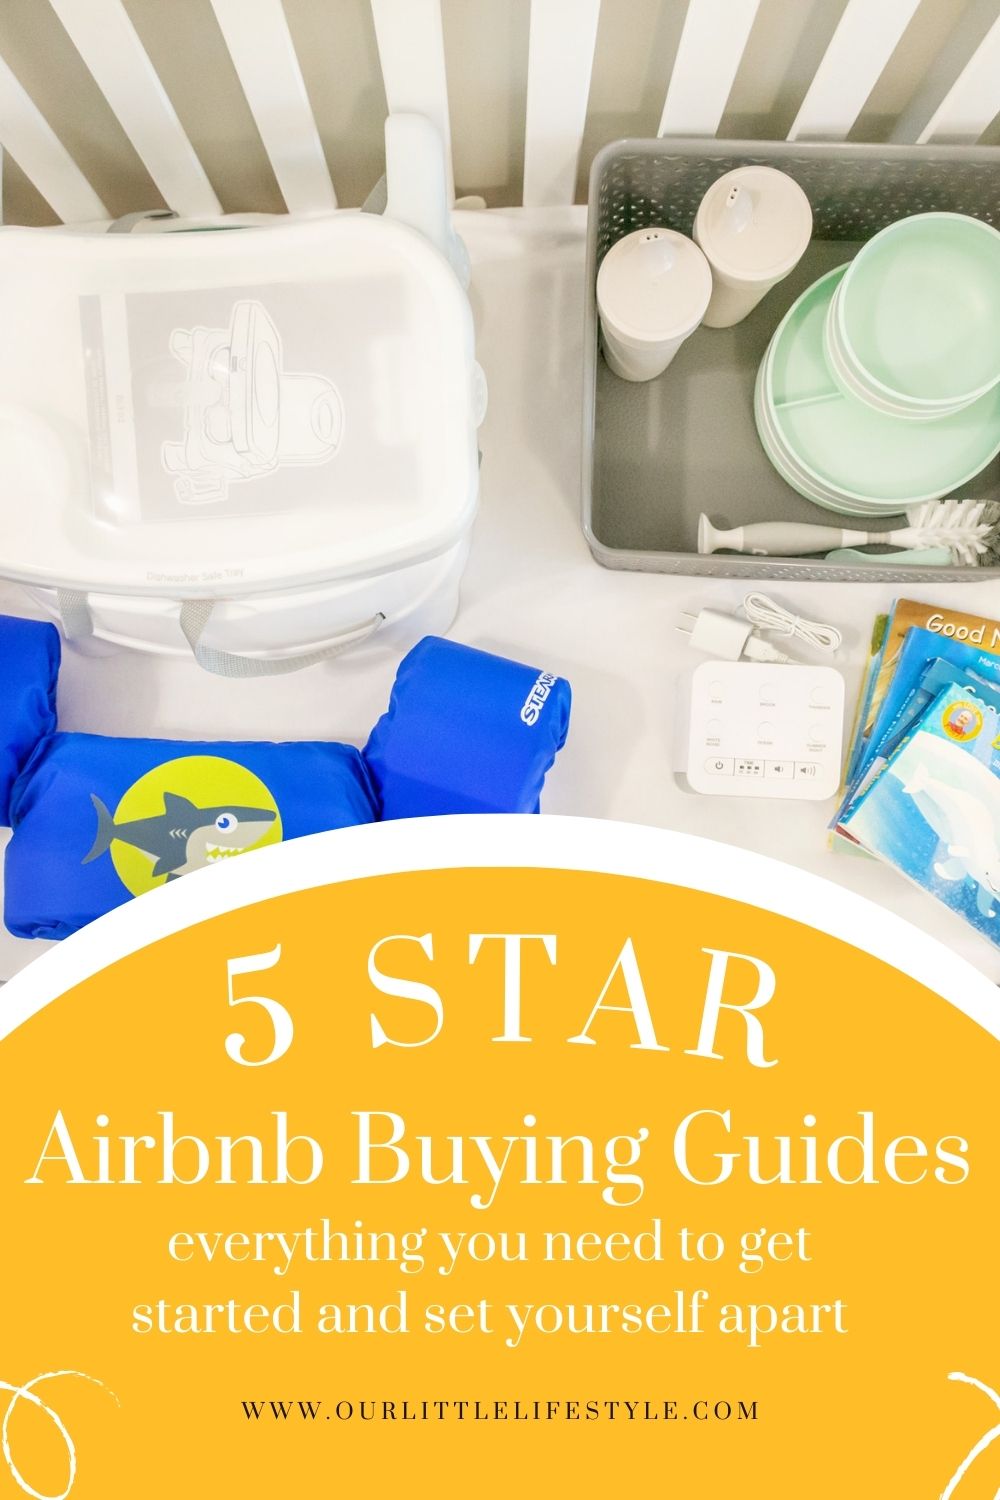 Airbnb Buying Guides